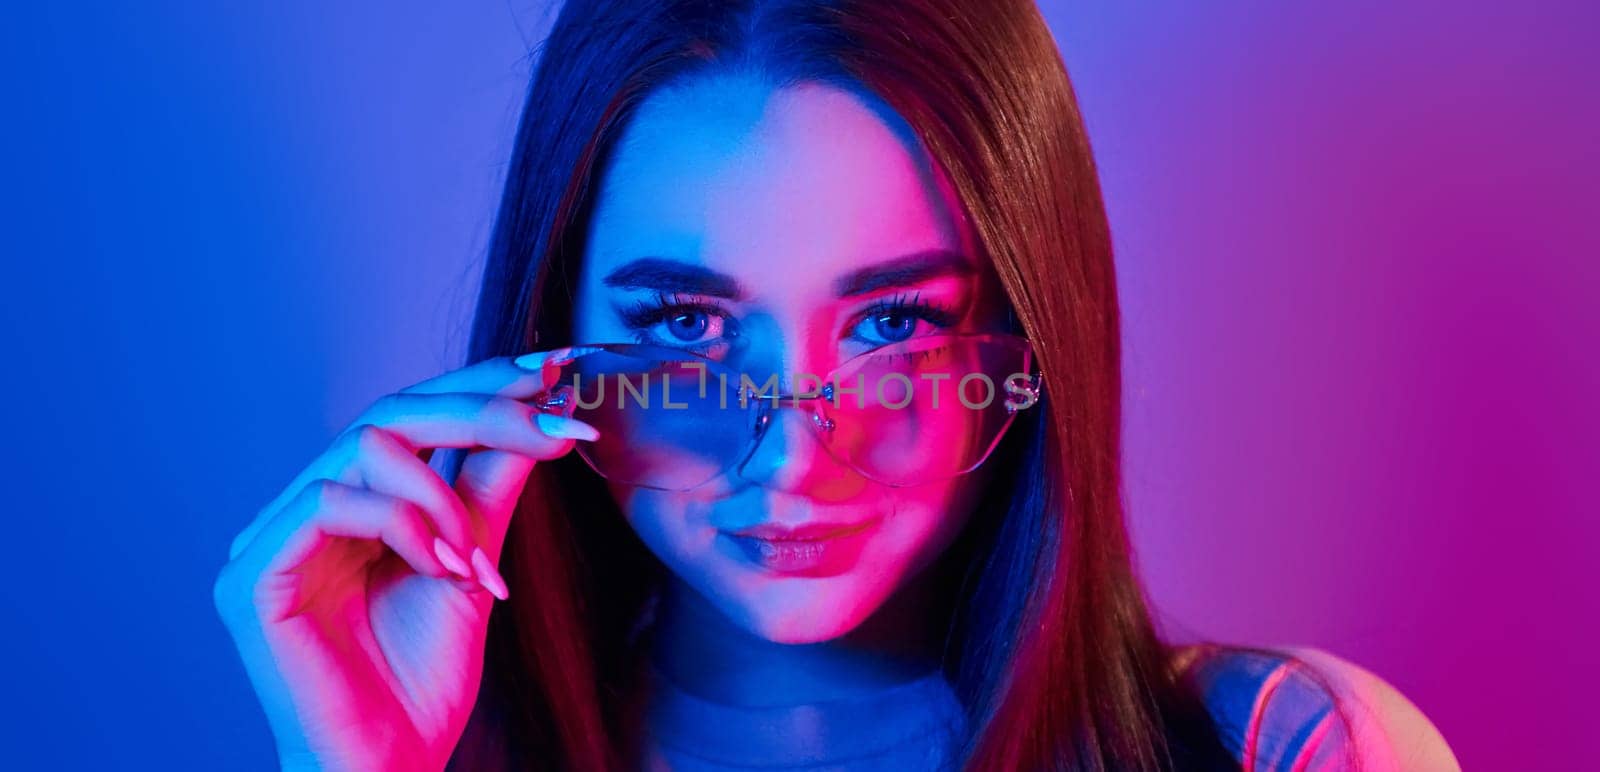 Neutral facial expression. Fashionable young woman standing in the studio with neon light.